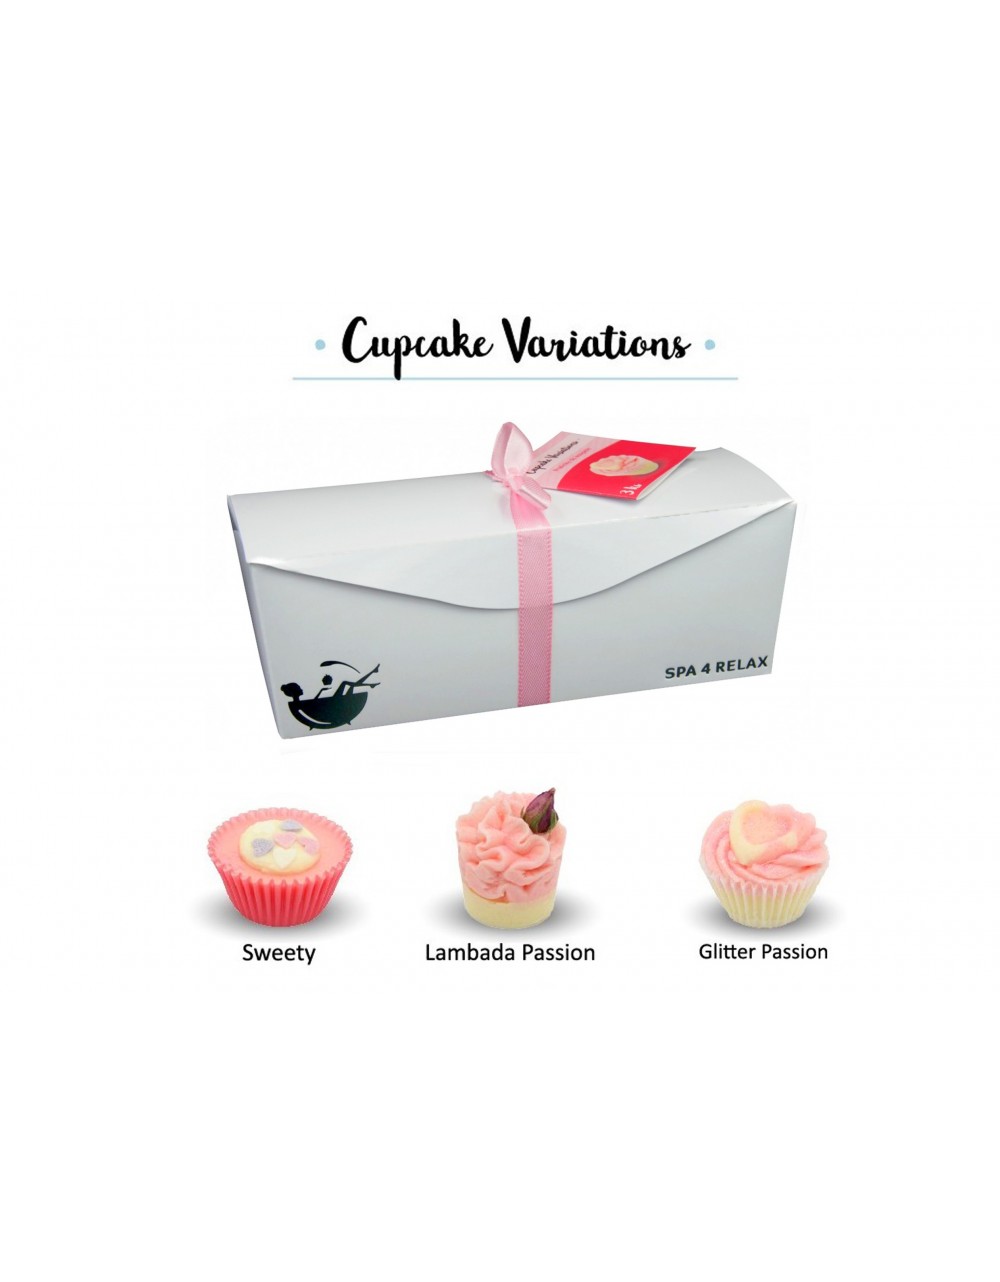 Cup cake variantions